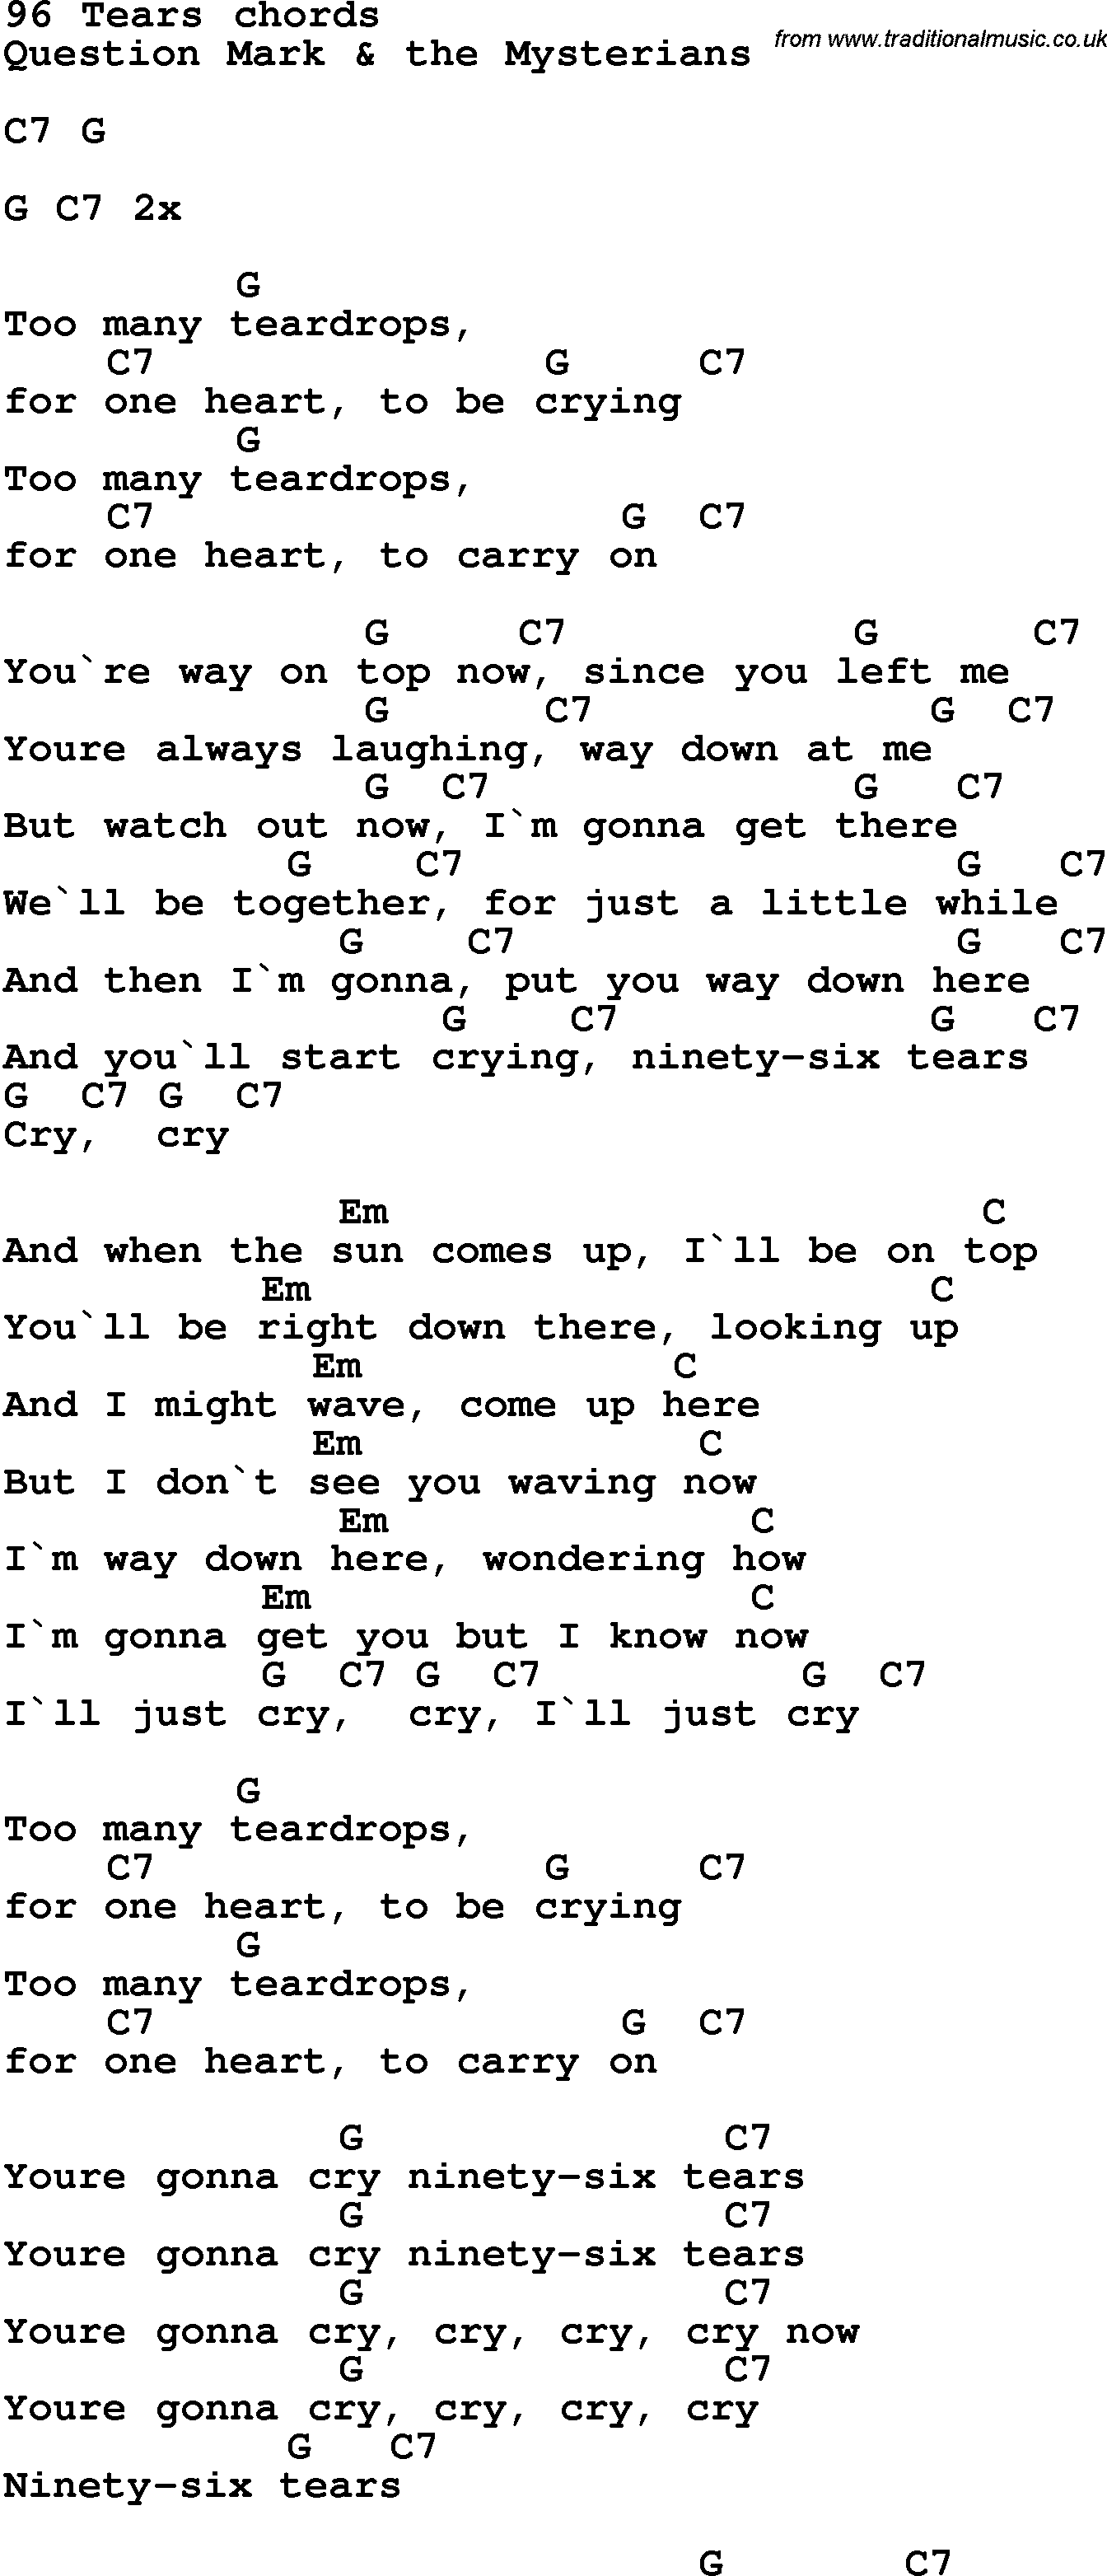 Song Lyrics with guitar chords for 96 Tears